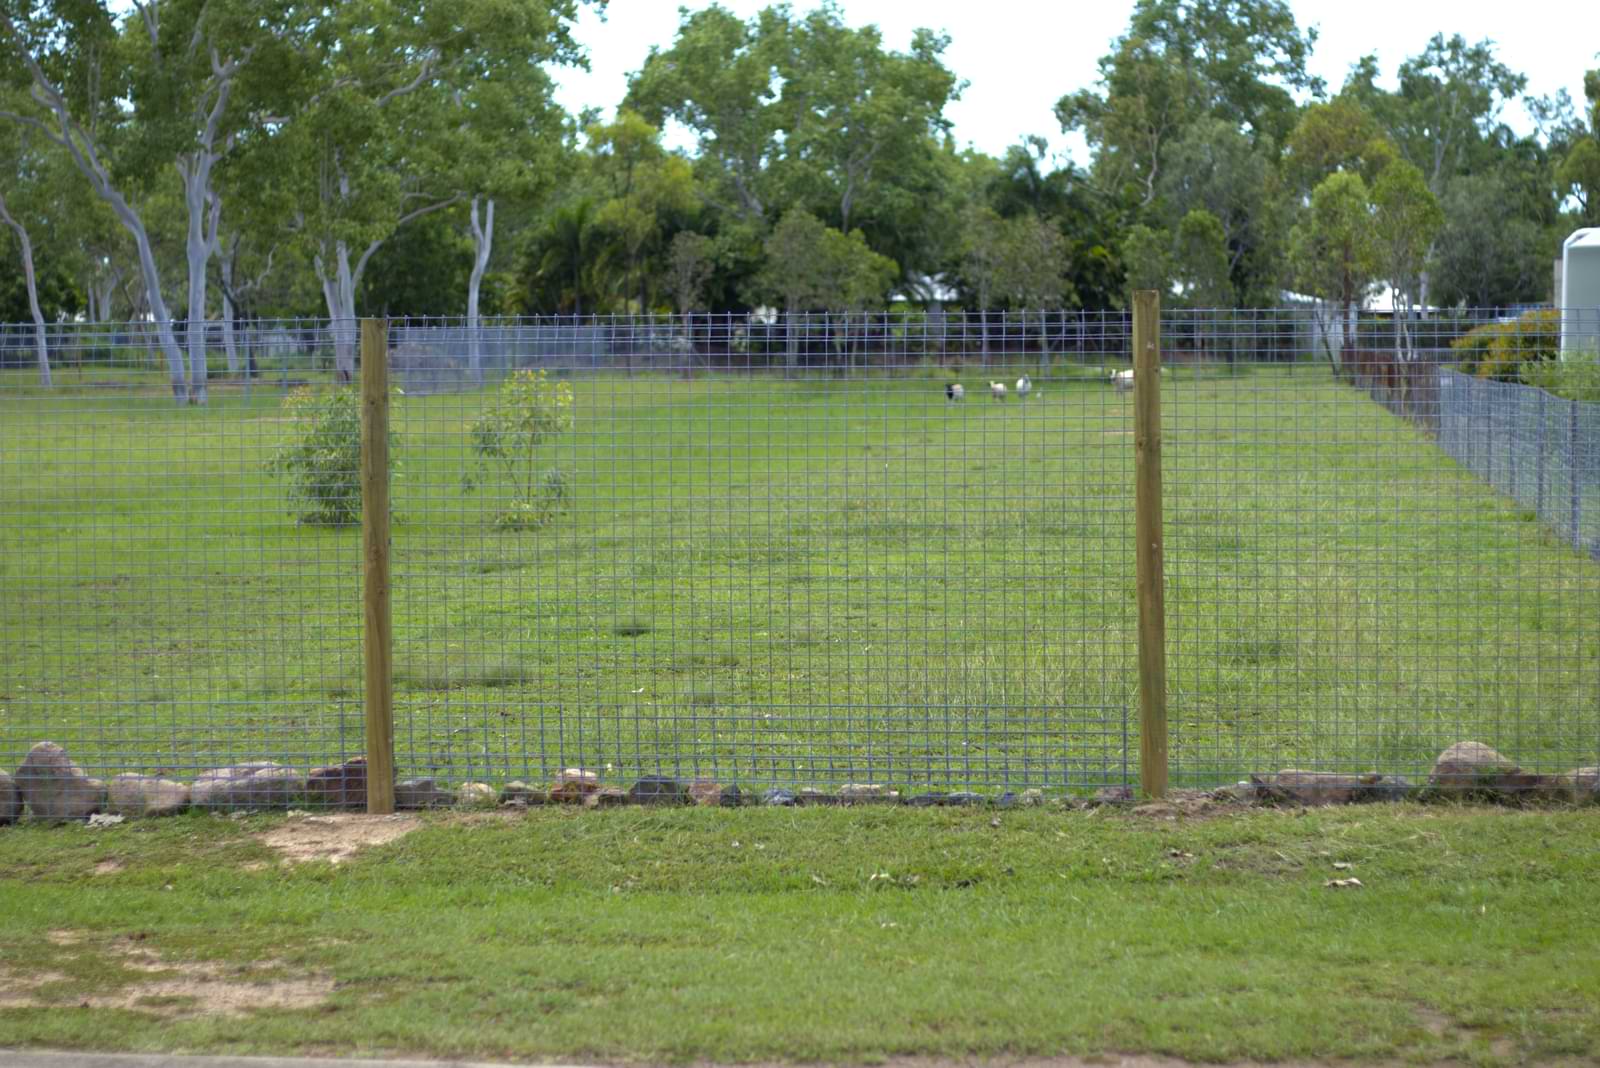 mesh wire fencing townsville